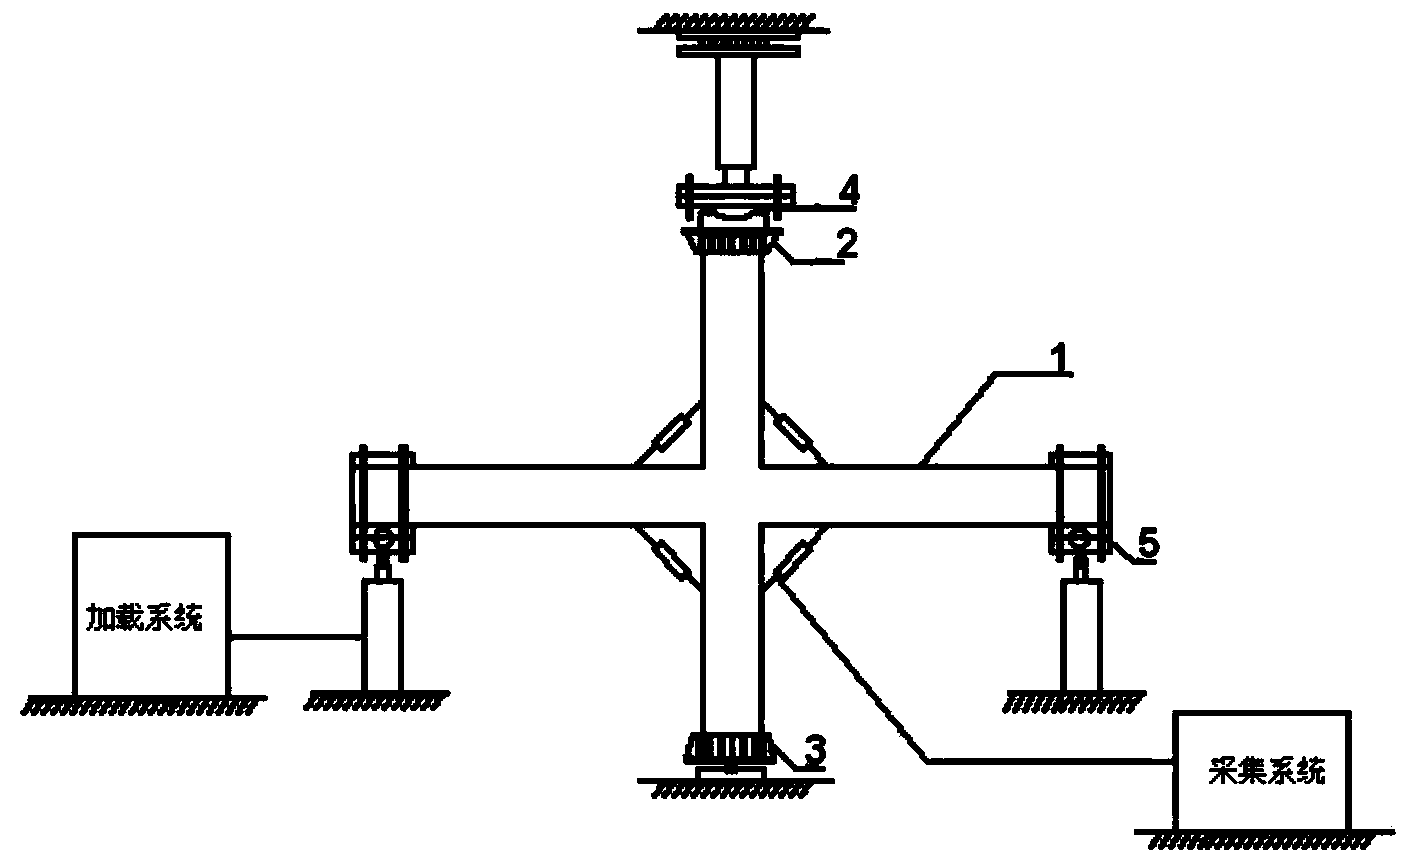 Beam-end loaded plane frame joint pseudo-static test loading device